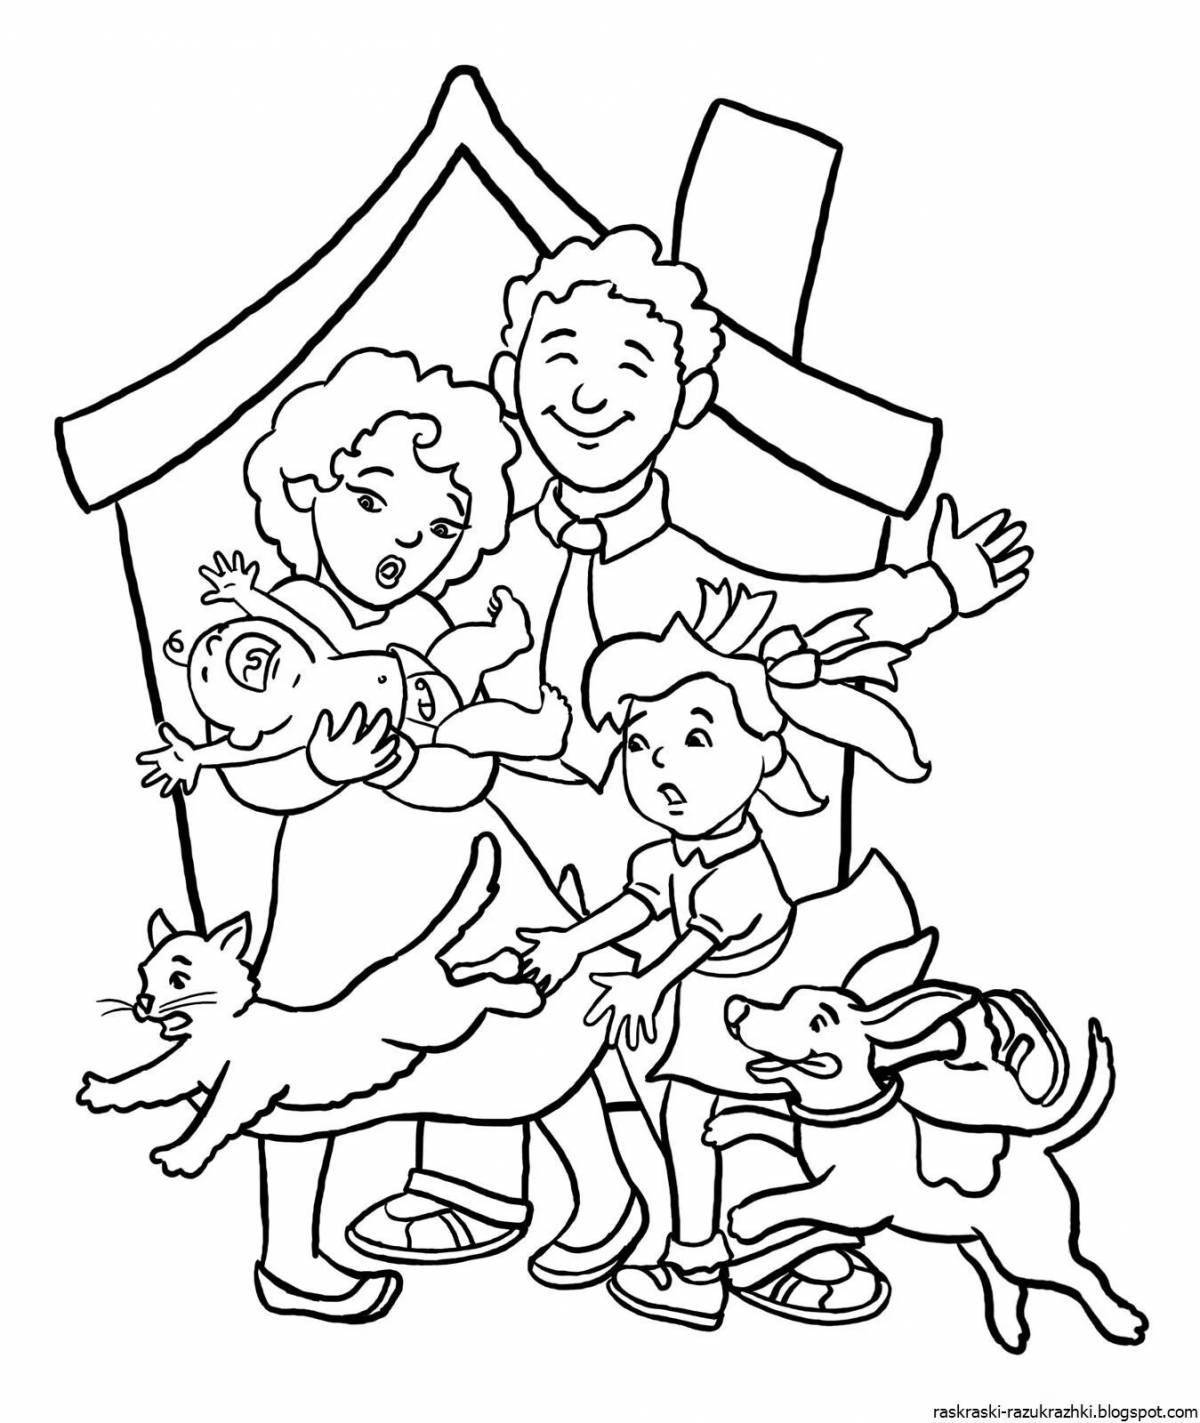 Charming family coloring book